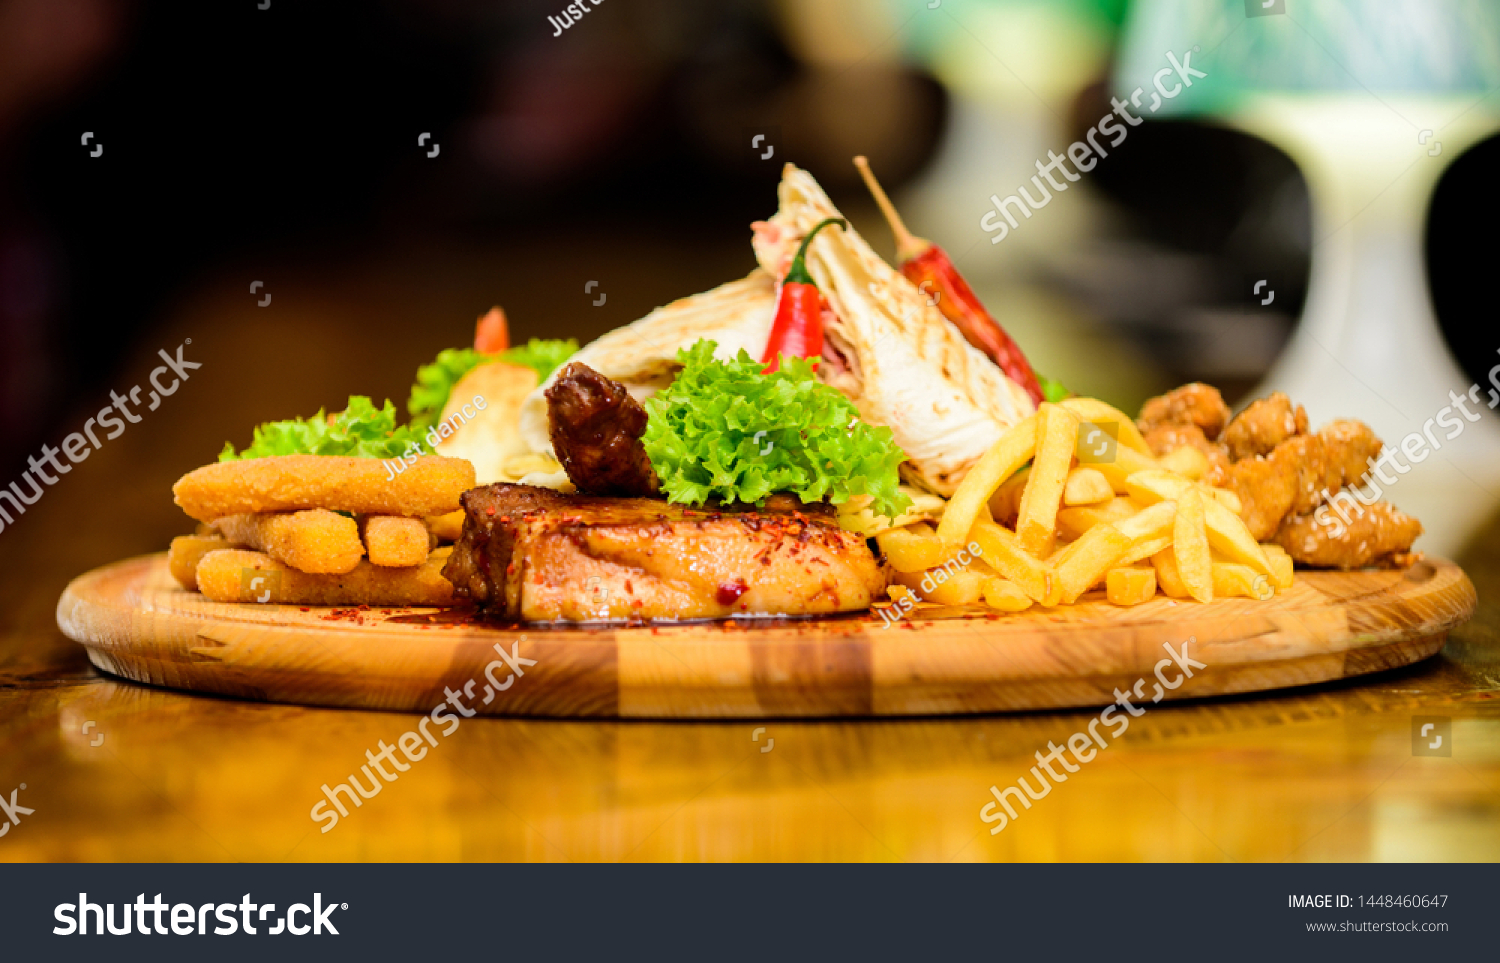 Restaurant food. Wooden board with lot french fries fish sticks burrito and meat steak served with salad. Pub menu snack. High calorie snack for group friends. Tasty delicious snacks. Snack for beer. #1448460647